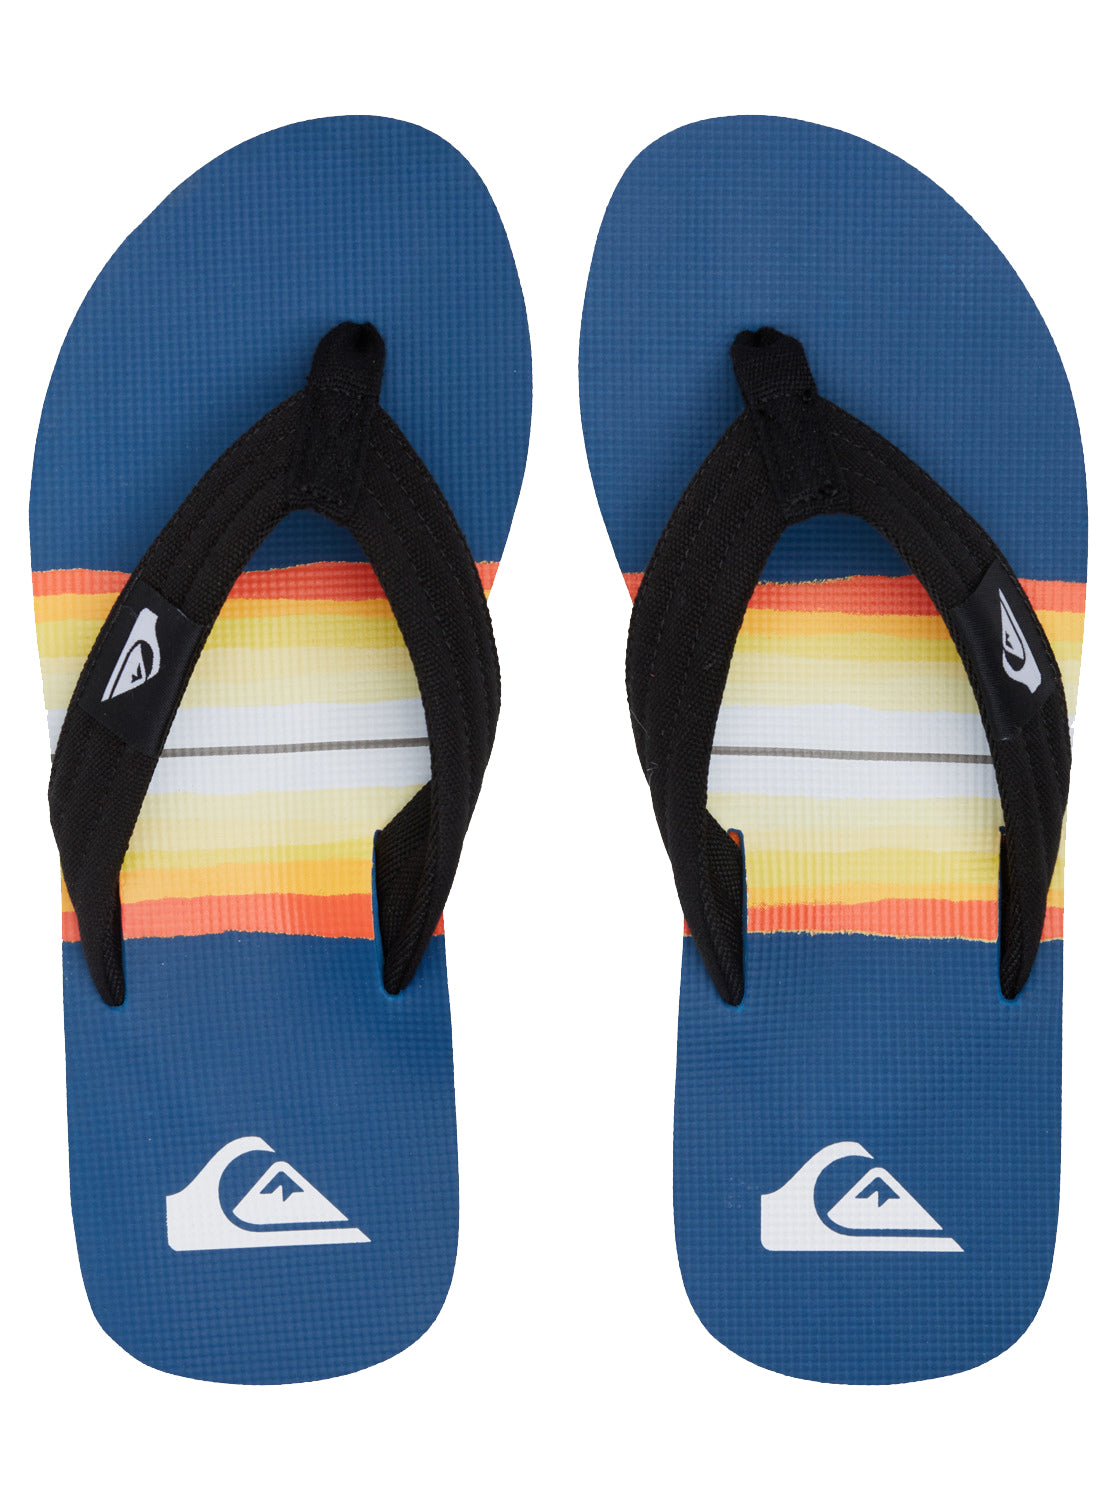 Quiksilver Molokai Layback Youth Sandal BYJ2-Blue 2 13 C